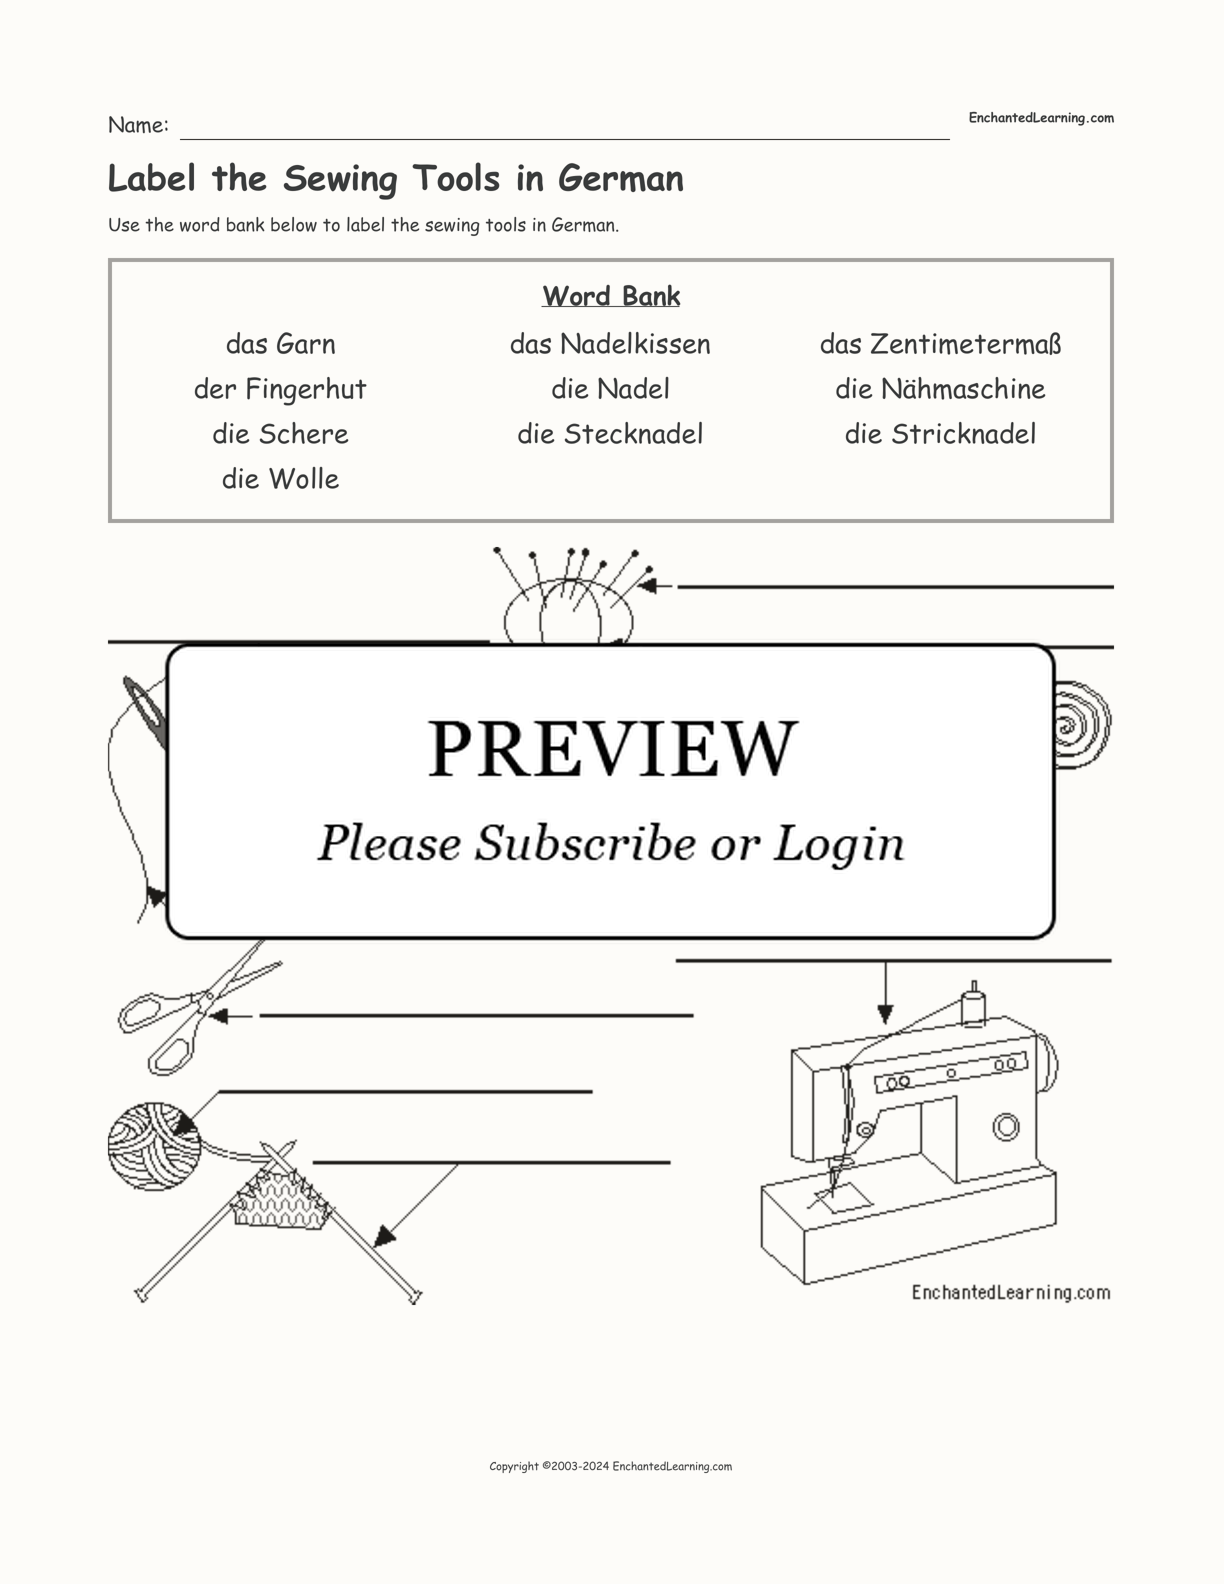 Label the Sewing Tools in German interactive worksheet page 1